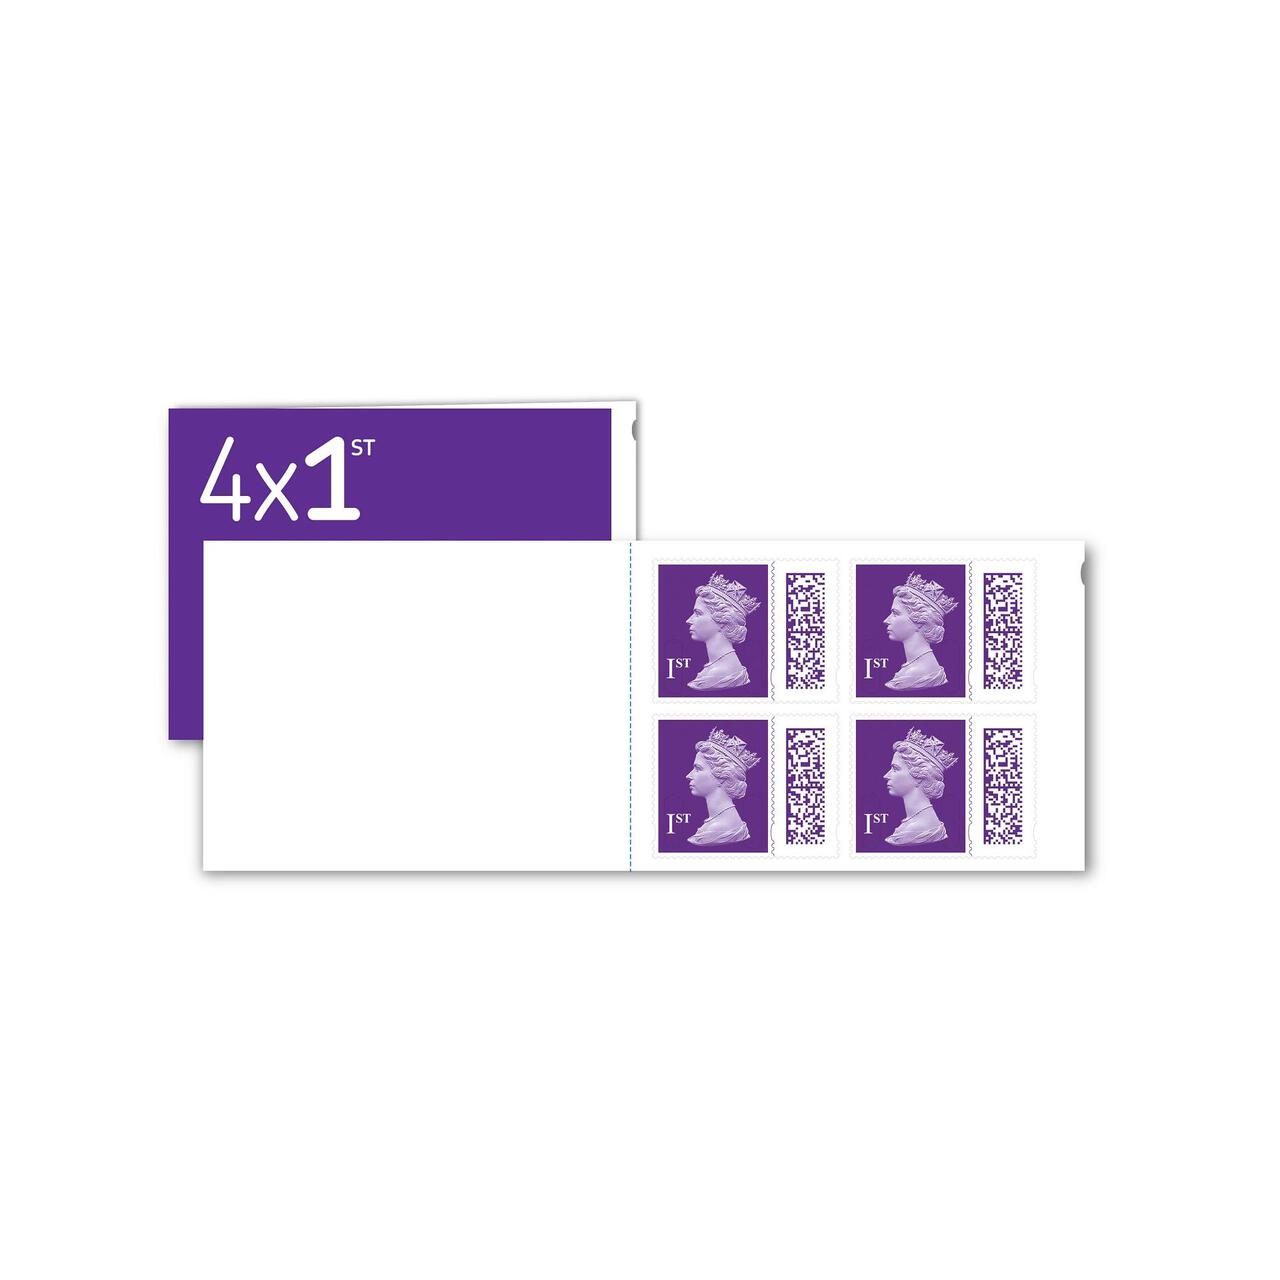 1st Class Stamps 4 per pack